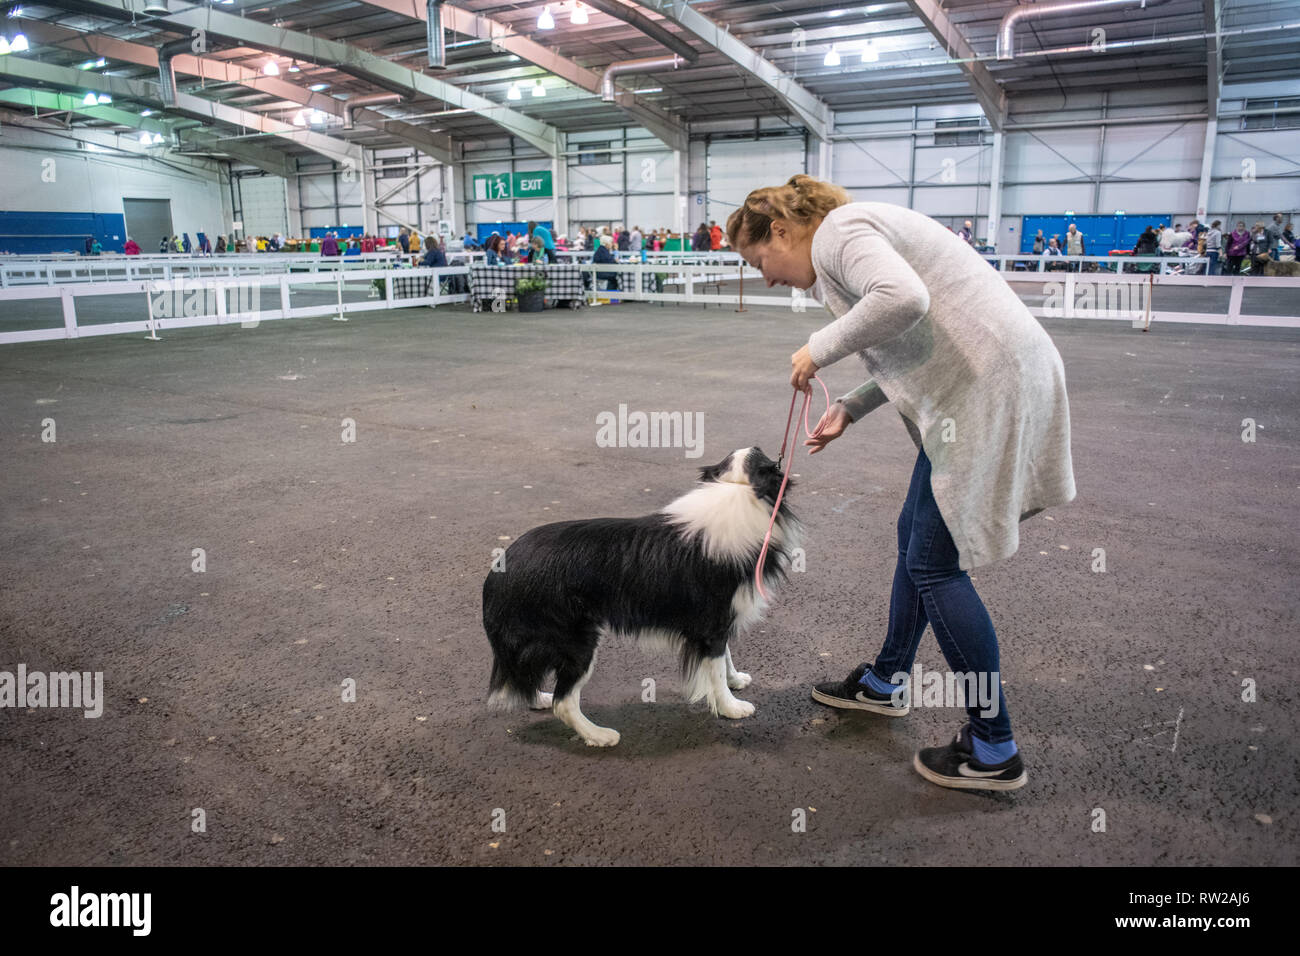 Woman giving instruction to her dog while in ring at dog show, Edinburgh, Scotland Stock Photo